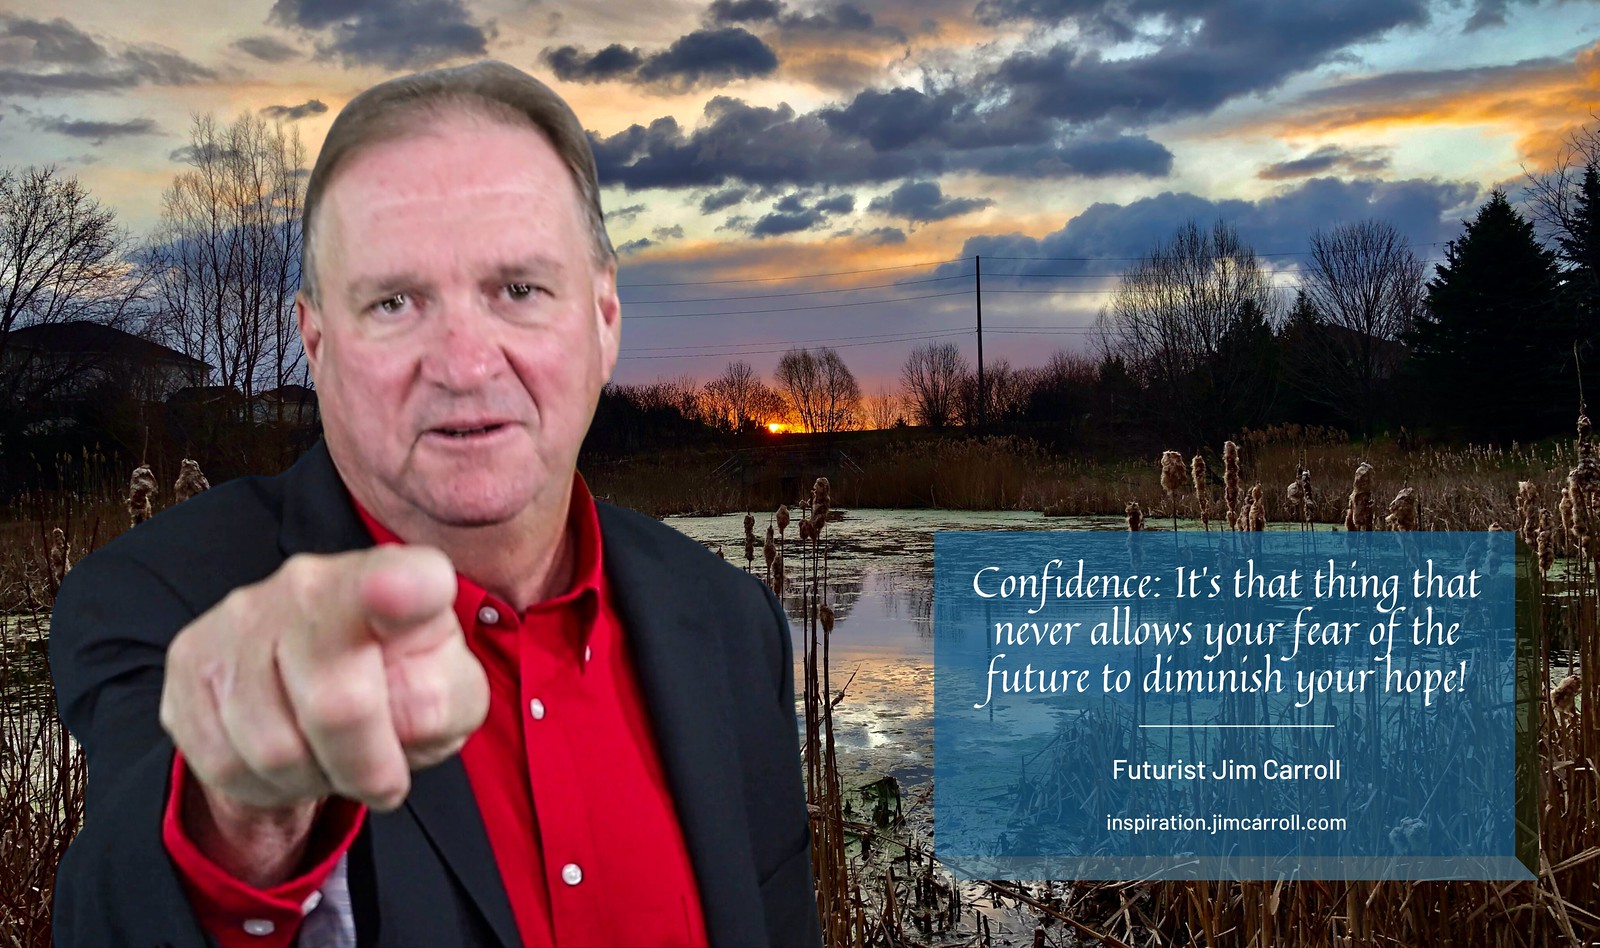 "Confidence: It's that thing that never allows your fear of the future to diminish your hope!" - Futurist Jim Carroll